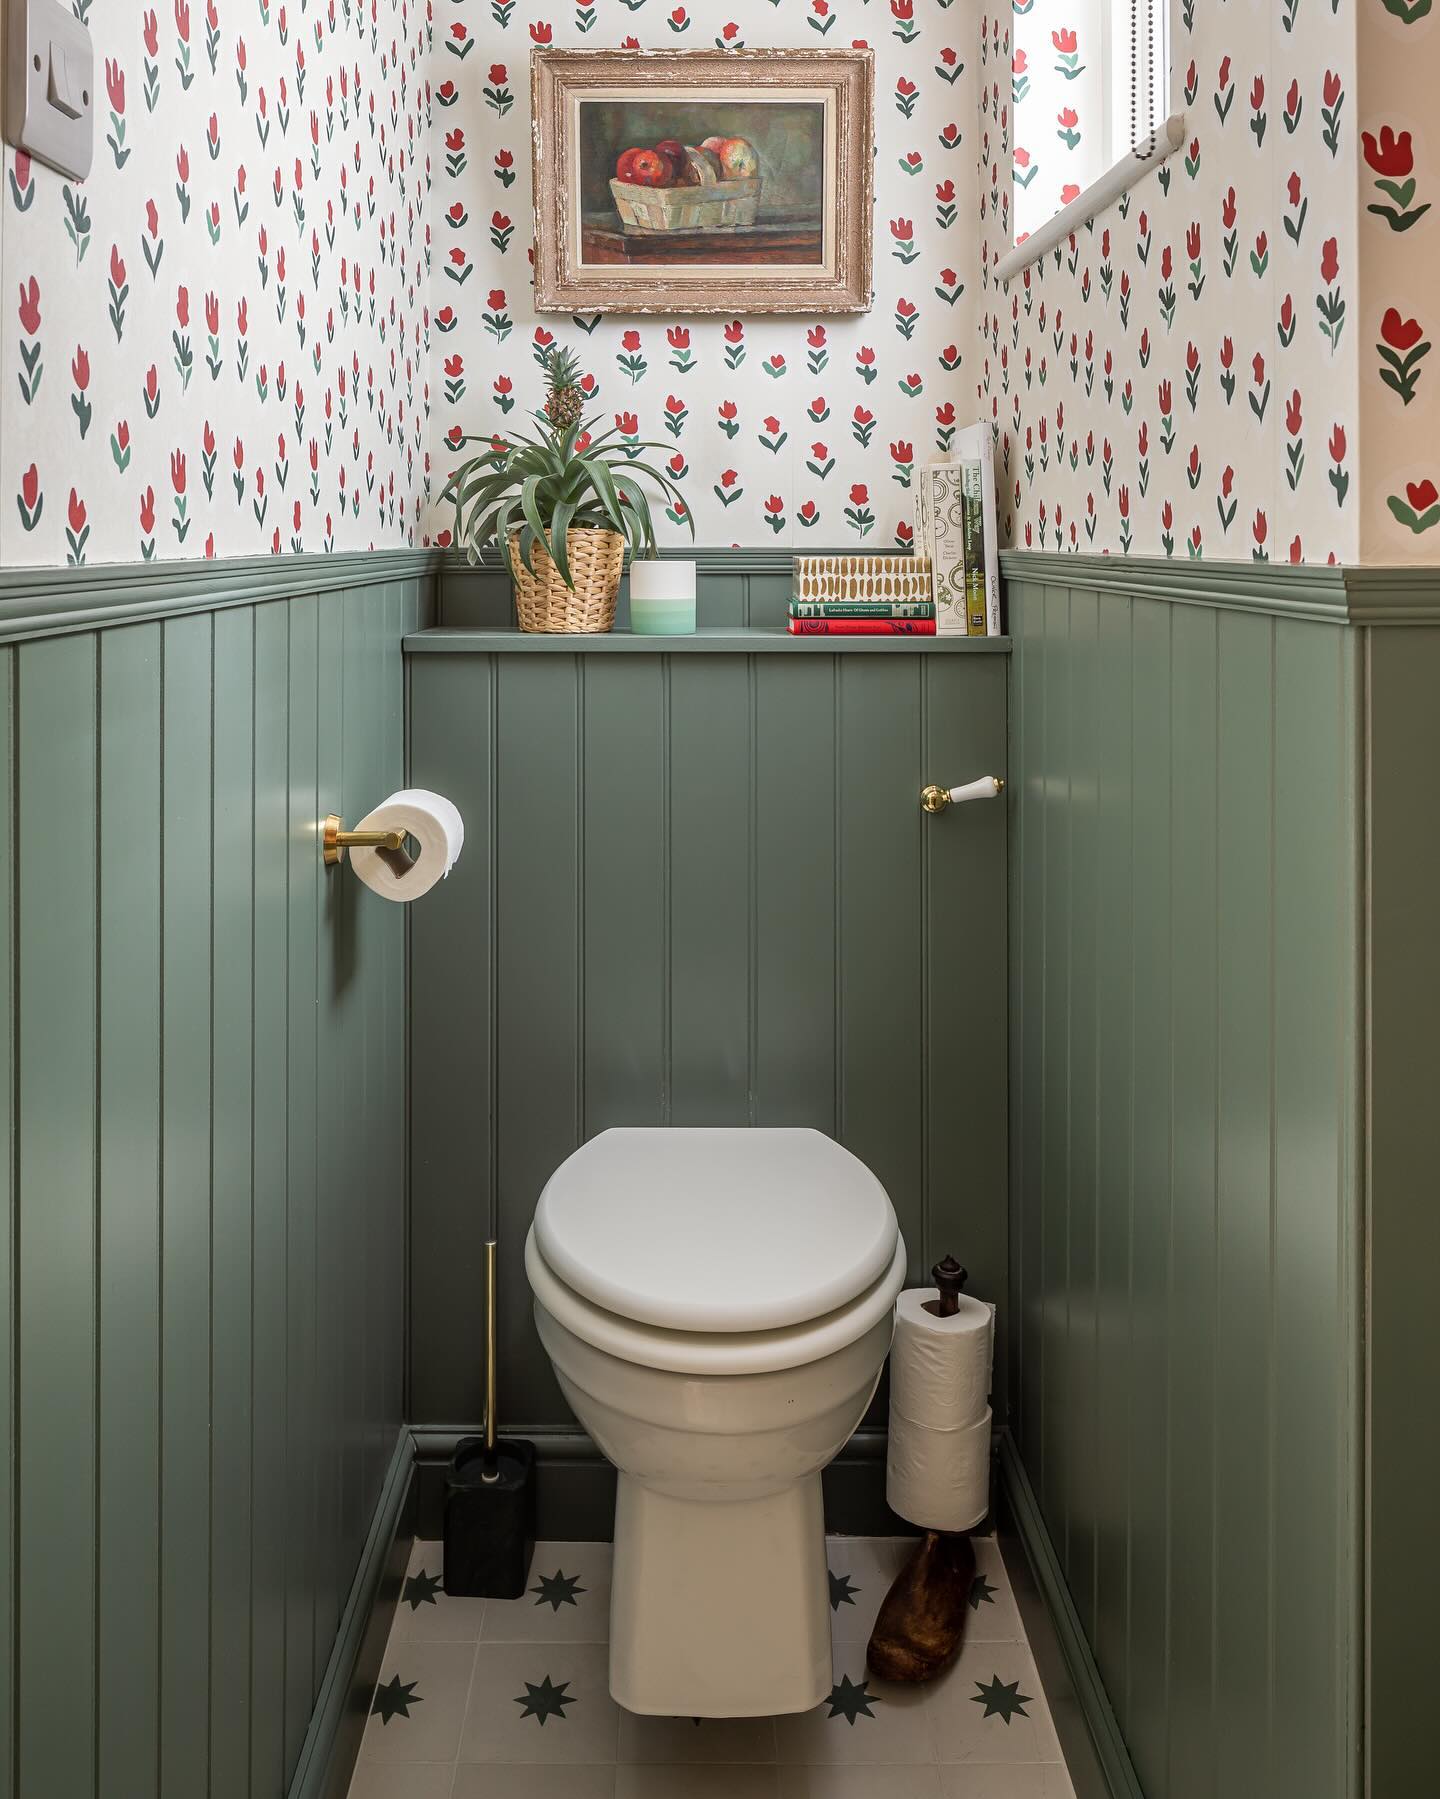 Emerald And Floral Toilet Decor